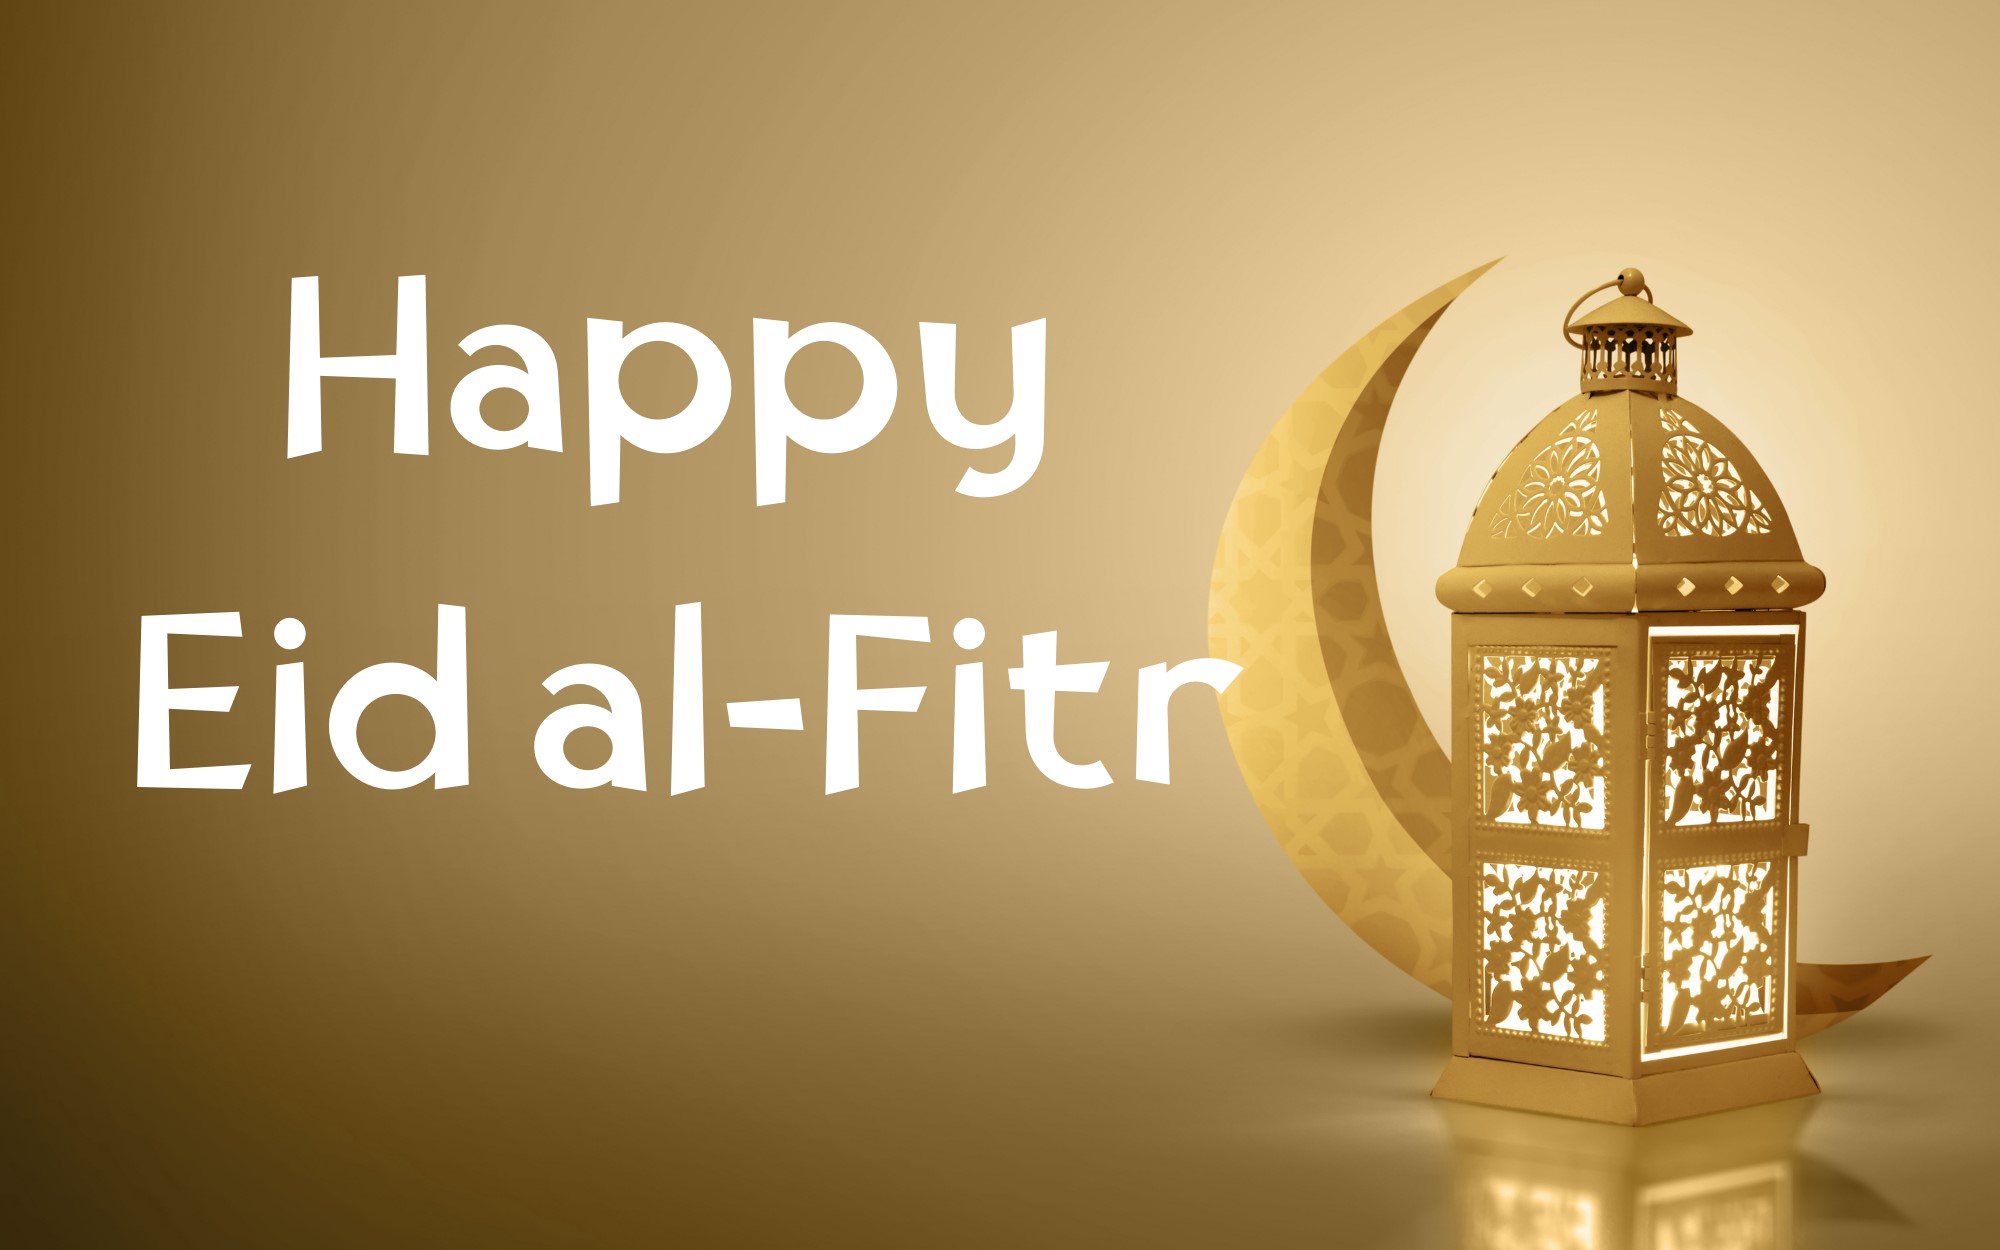 18-facts-about-eid-al-fitr-festival-of-breaking-the-fast